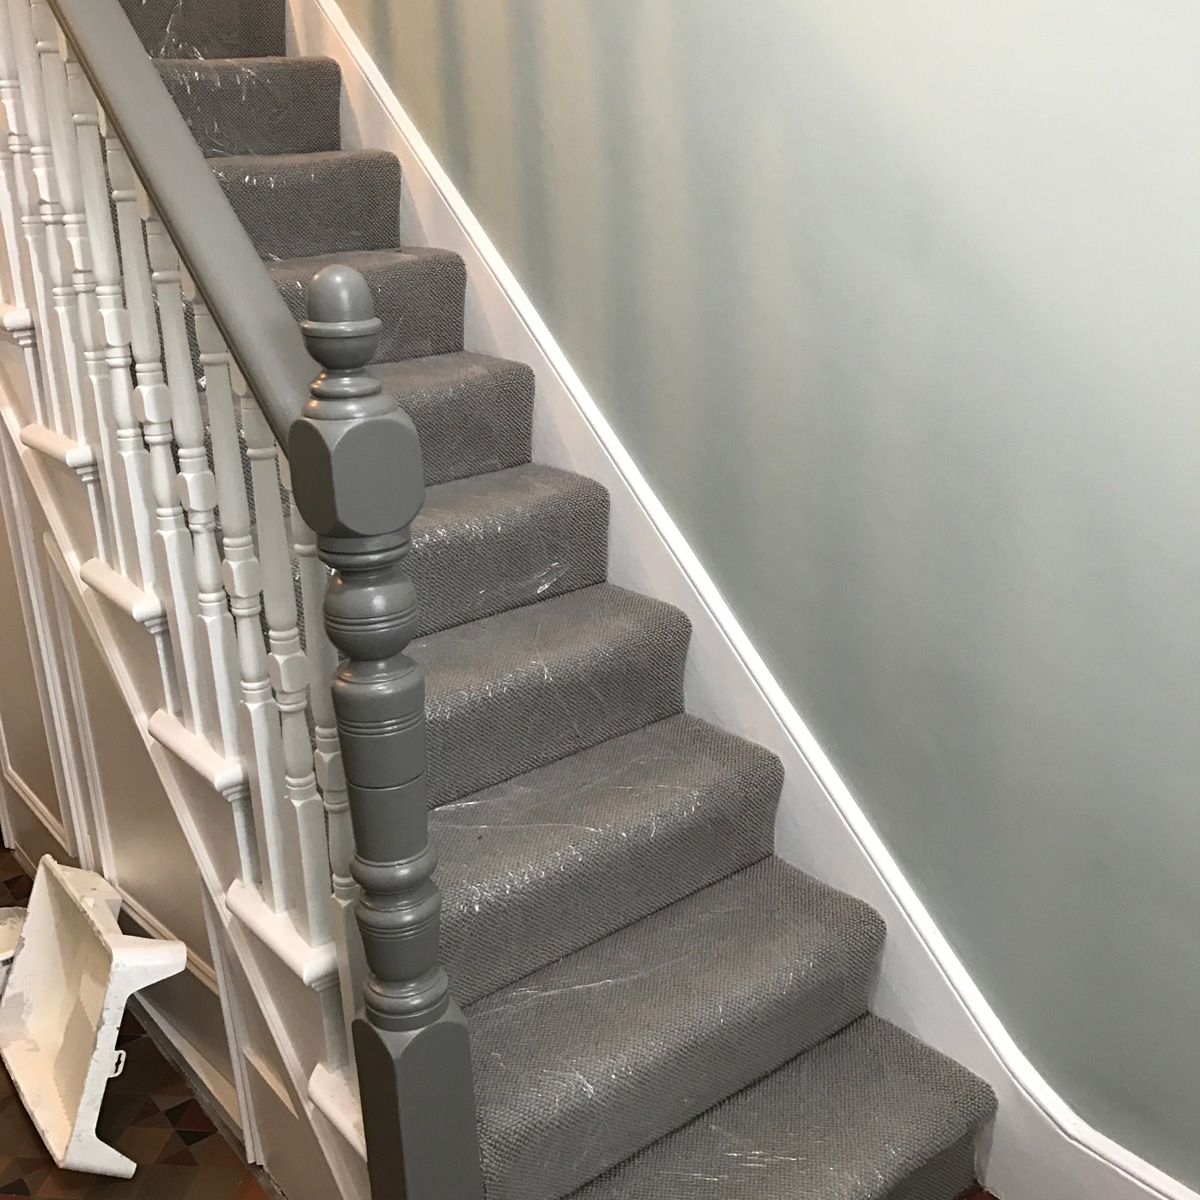 Stairway and banisters after painting (carpet protector still in place)